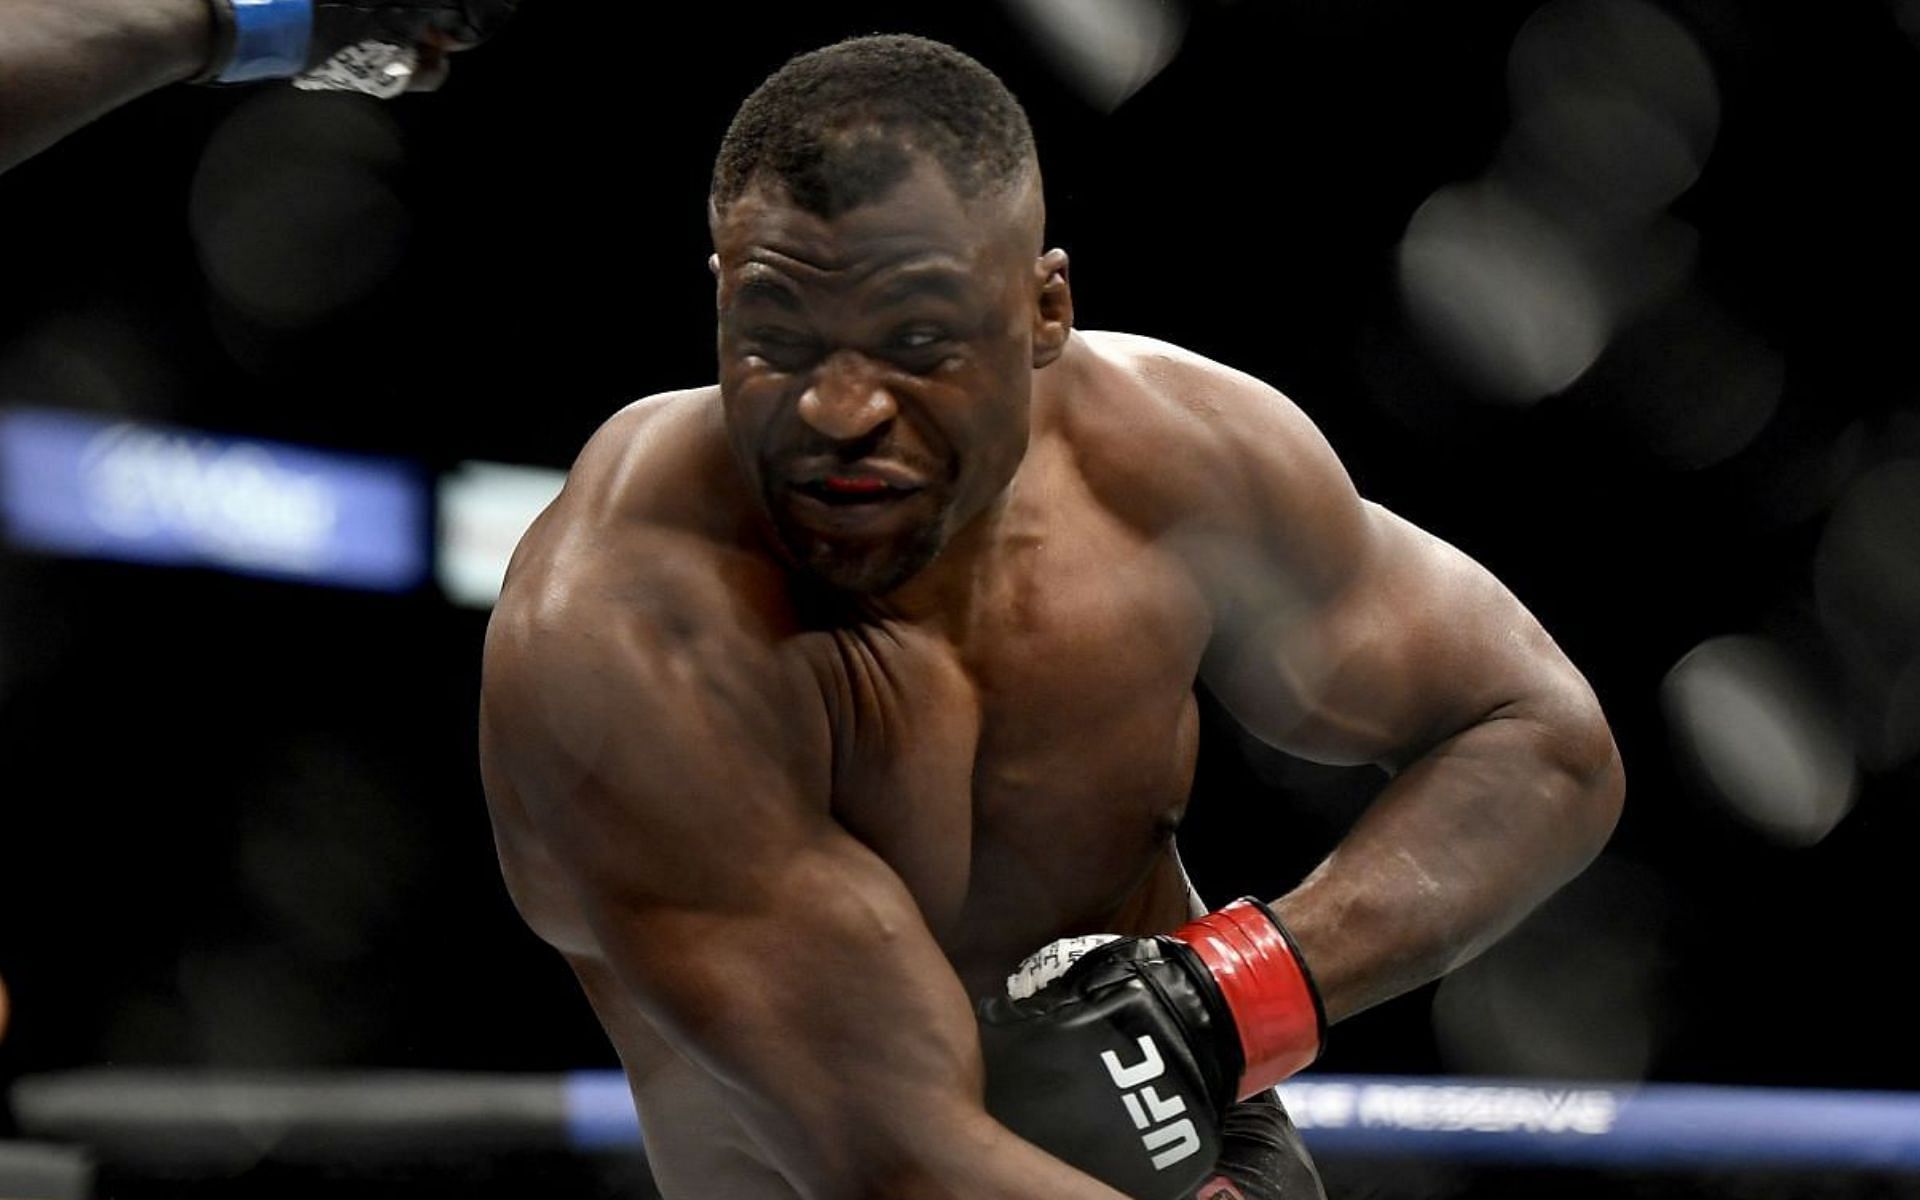 Francis Ngannou is working on his cardio as he prepares to head into battle at UFC 270